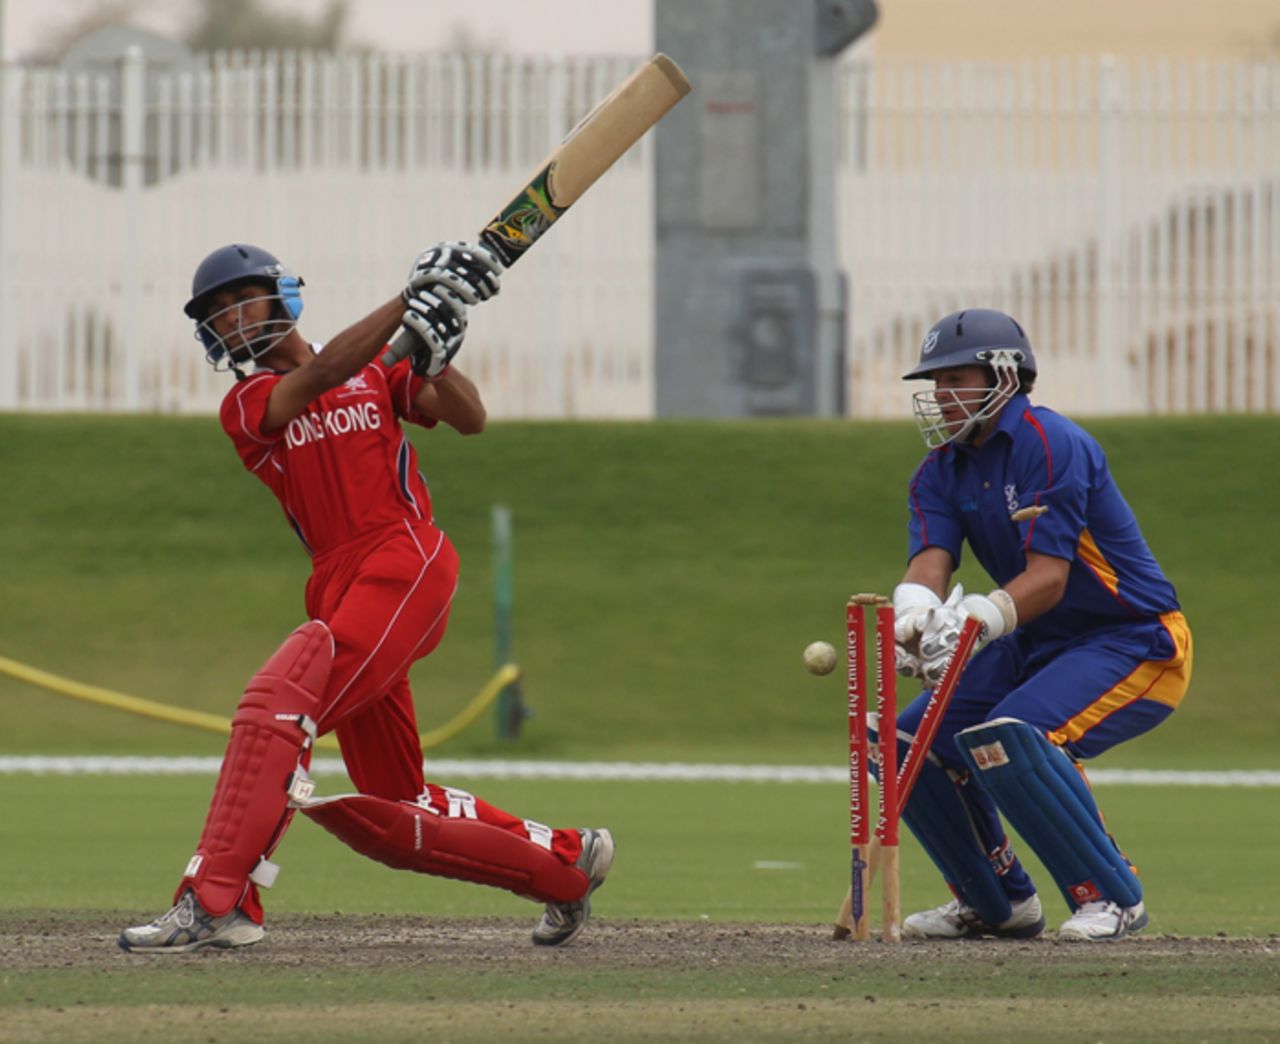 Asif Khan is bowled against Namibia XI in a WCL2 warm-up game played at the Emirates Sevens ground in Dubai on 5th April 2011